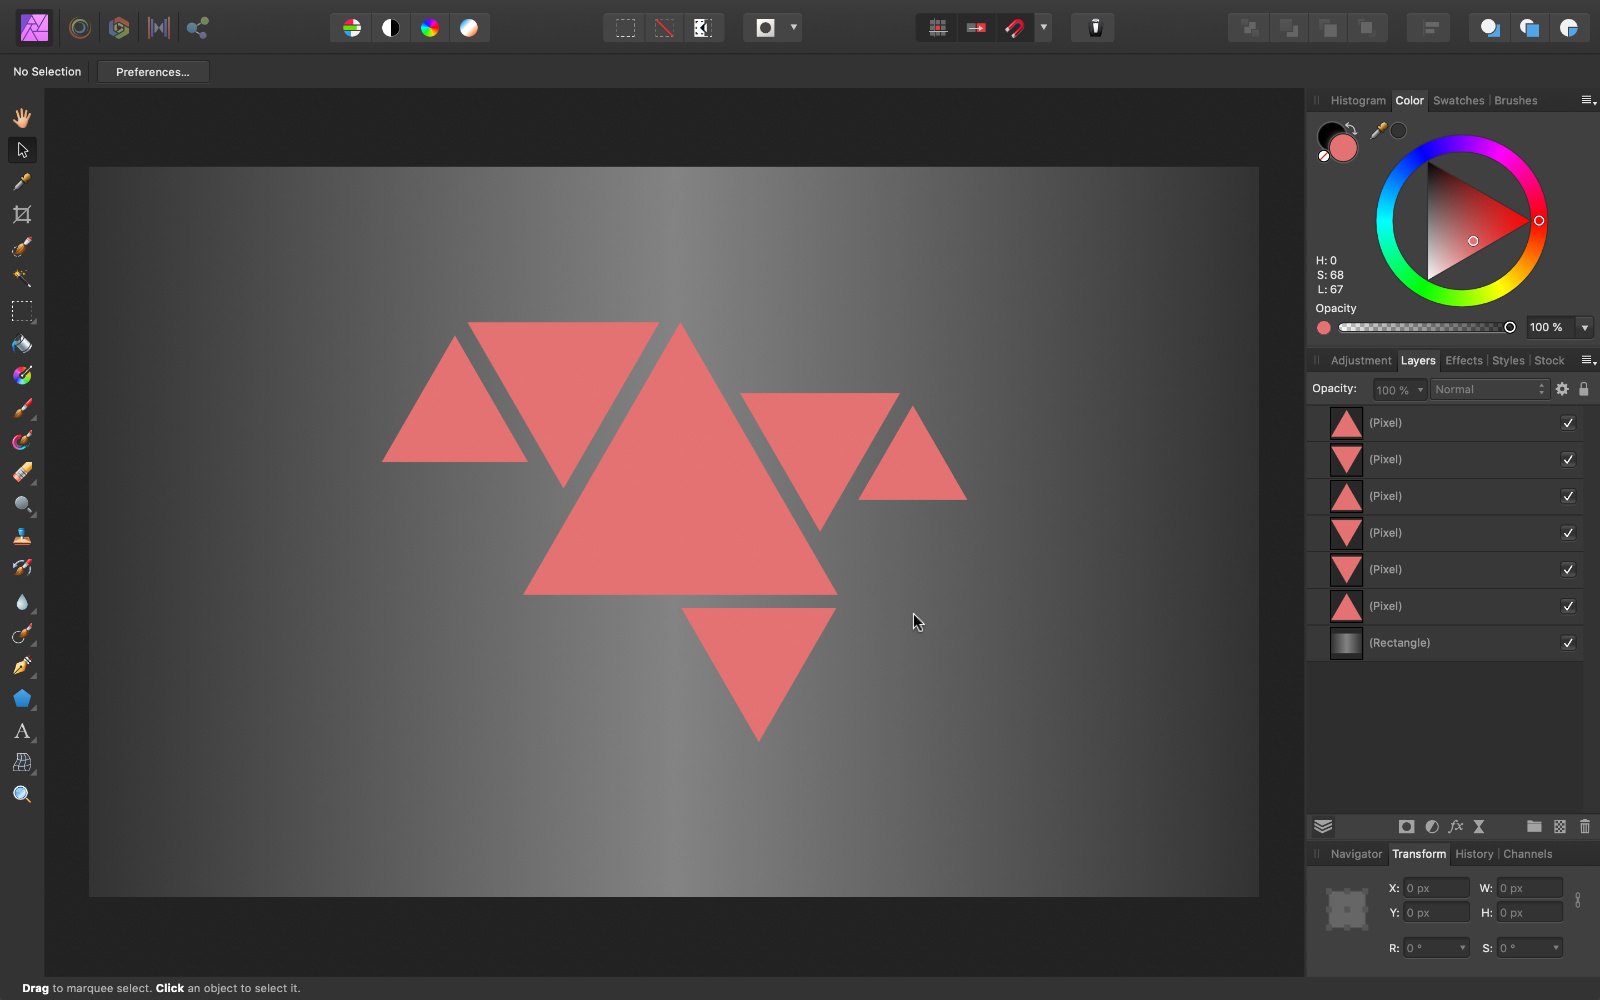 Repeat to create more triangles